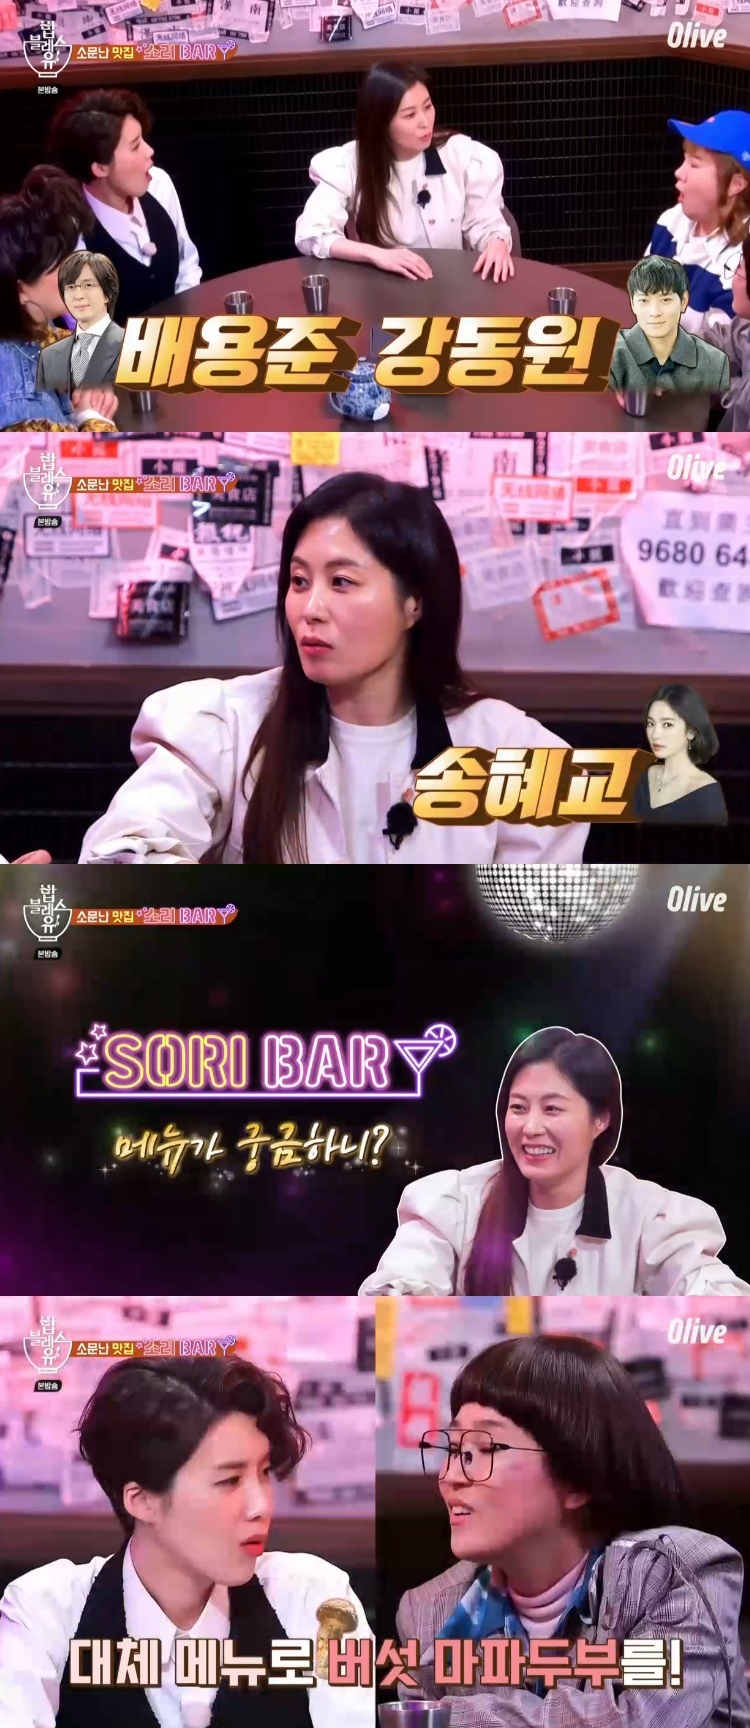 Seoul = = Actor Moon So-ri has unveiled an extraordinary class of Soriba.In the olive entertainment program Bobblesse 2 broadcasted on the 12th, Moon So-ri appeared as the first sister of life and announced the existence of Soriba.Moon So-ri was asked if he usually likes to drink, saying, I am sorry that I ate less when I died, I do not think I will think about this.I ate enough to eat, he replied, and became a new caste charge .If someone says its hard, Ill say, Come and get me some rice, he said, starting to mention the stars who went to Soriba.Moon So-ri was surprised to find that Mr. Bae Yong-joon, Mr. Kang Mobilization came and Mr. Song Hye-kyo came.There are a lot of people working together. Recently, there were about 18 people at once, including Lee Young-jin Actor of Jurors.The Soriba menu was also released. Moon So-ri said, The Usaengsoon team visited. The coach is vegetarian.I put Meat on the table, so I did mushroom tofu that did not have Meat. Park Na-rae was surprised to say, Do you have lunch? So Moon So-ri boasted of an extraordinary force, saying, If you unpack some starch powder, it will become thickly Chinese.Moon So-ri also said, My friend once sent me a colaby, sliced the chaff into a cotton sweat. When asked if he also had Thai food, he said, If you put fish sauce in it, it is roughly.I sprinkle some peanuts, he said, and he laughed.So, members of Bobblesse 2 including Park Na-rae, Jang Do-yeon, Song Eun-yi and Kim Sook said, Please invite me to Soriba.Especially, Mr. Mobilization, please call me when you come, four people are in the head, he joked and laughed.